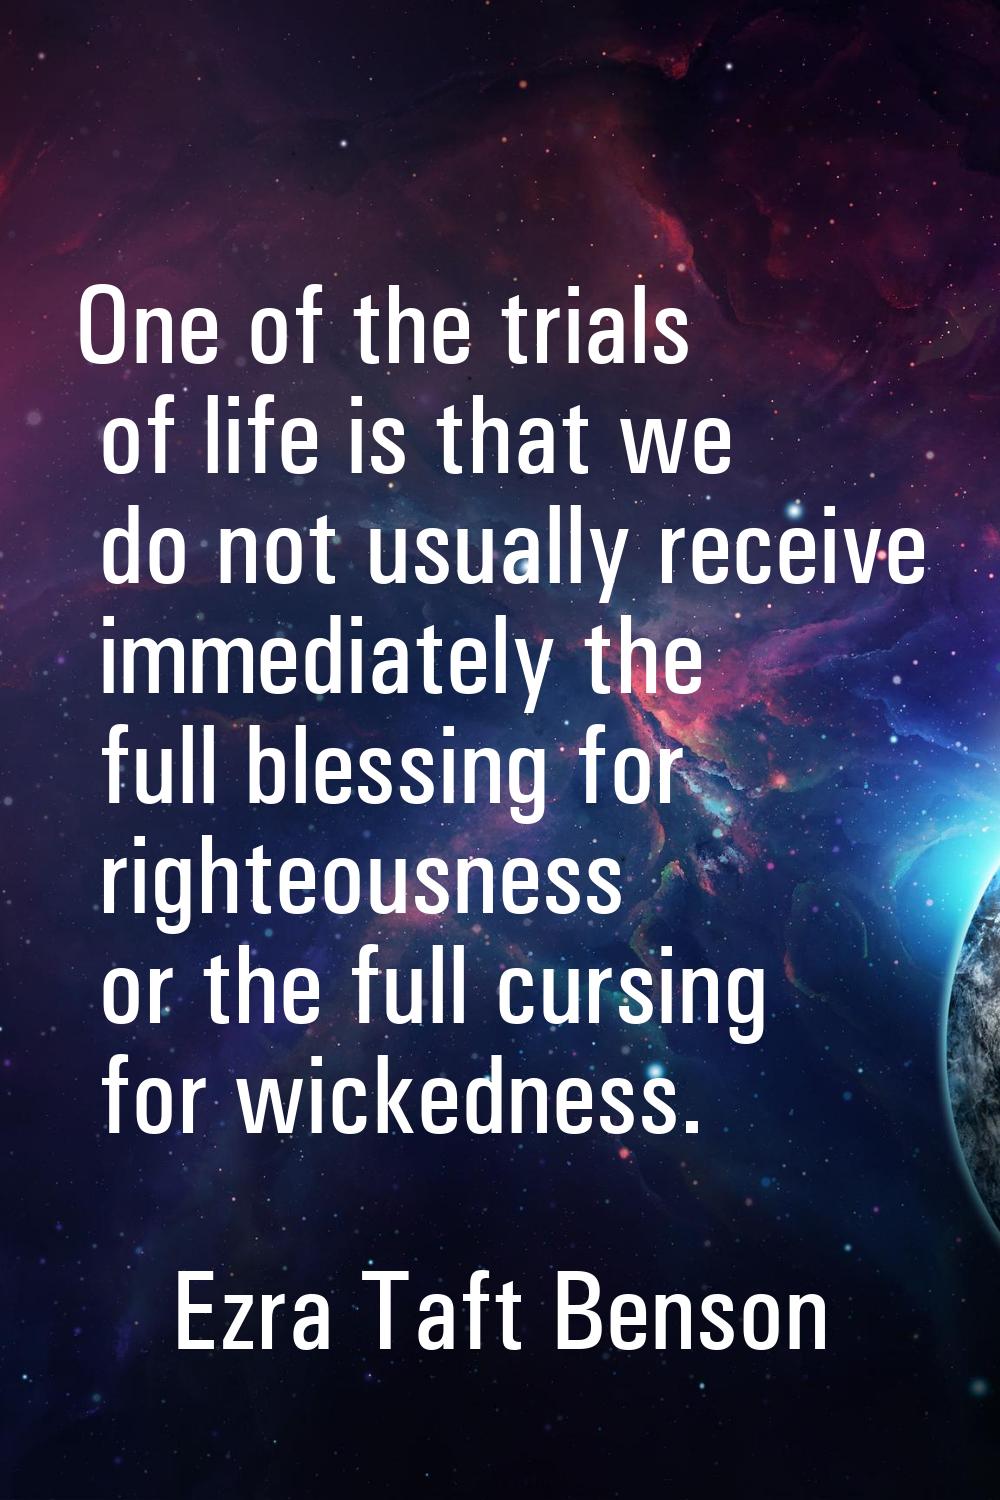 One of the trials of life is that we do not usually receive immediately the full blessing for right